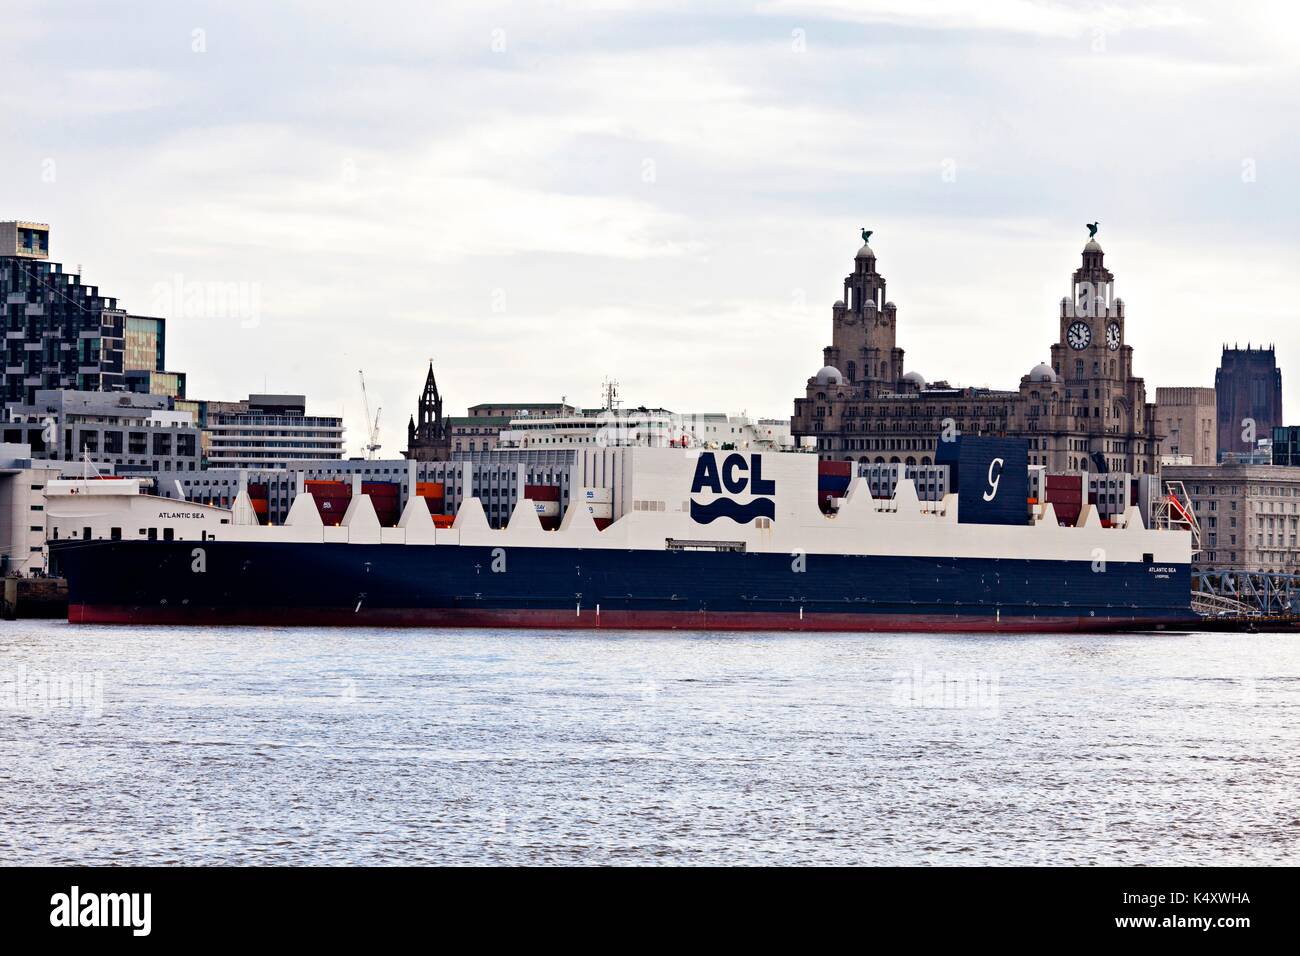 ACL (Atlantic Container Line) vessel, Atlantic Sea, built 2016, at the Landing Stage, Liverpool. The 55,649-ton, 296m vessel can carry 3,800 TEUs. Stock Photo